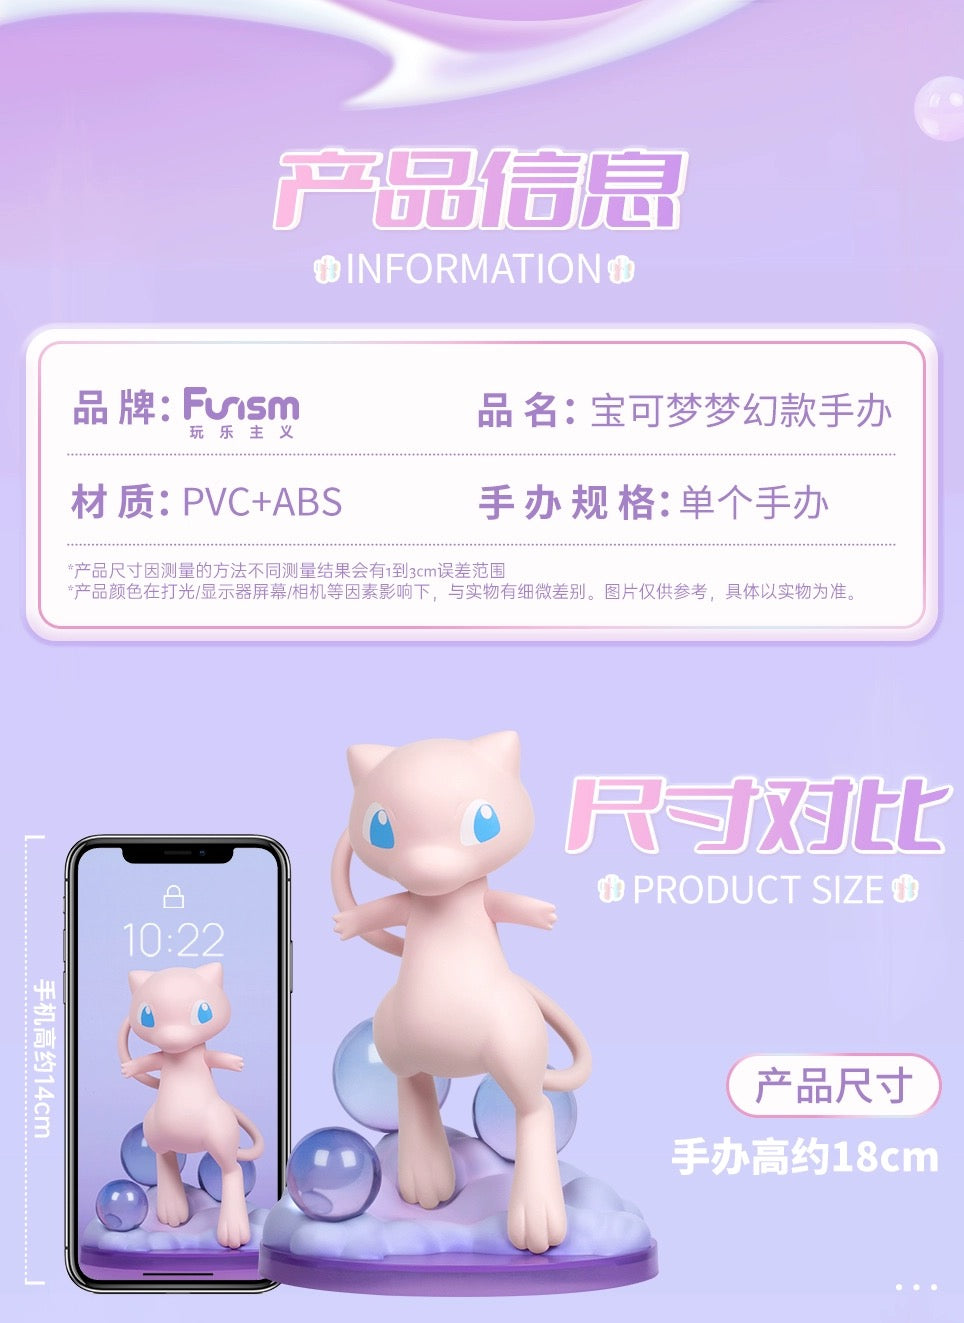 Pokemon Characters Figure 17cm Mew - Toy Collection